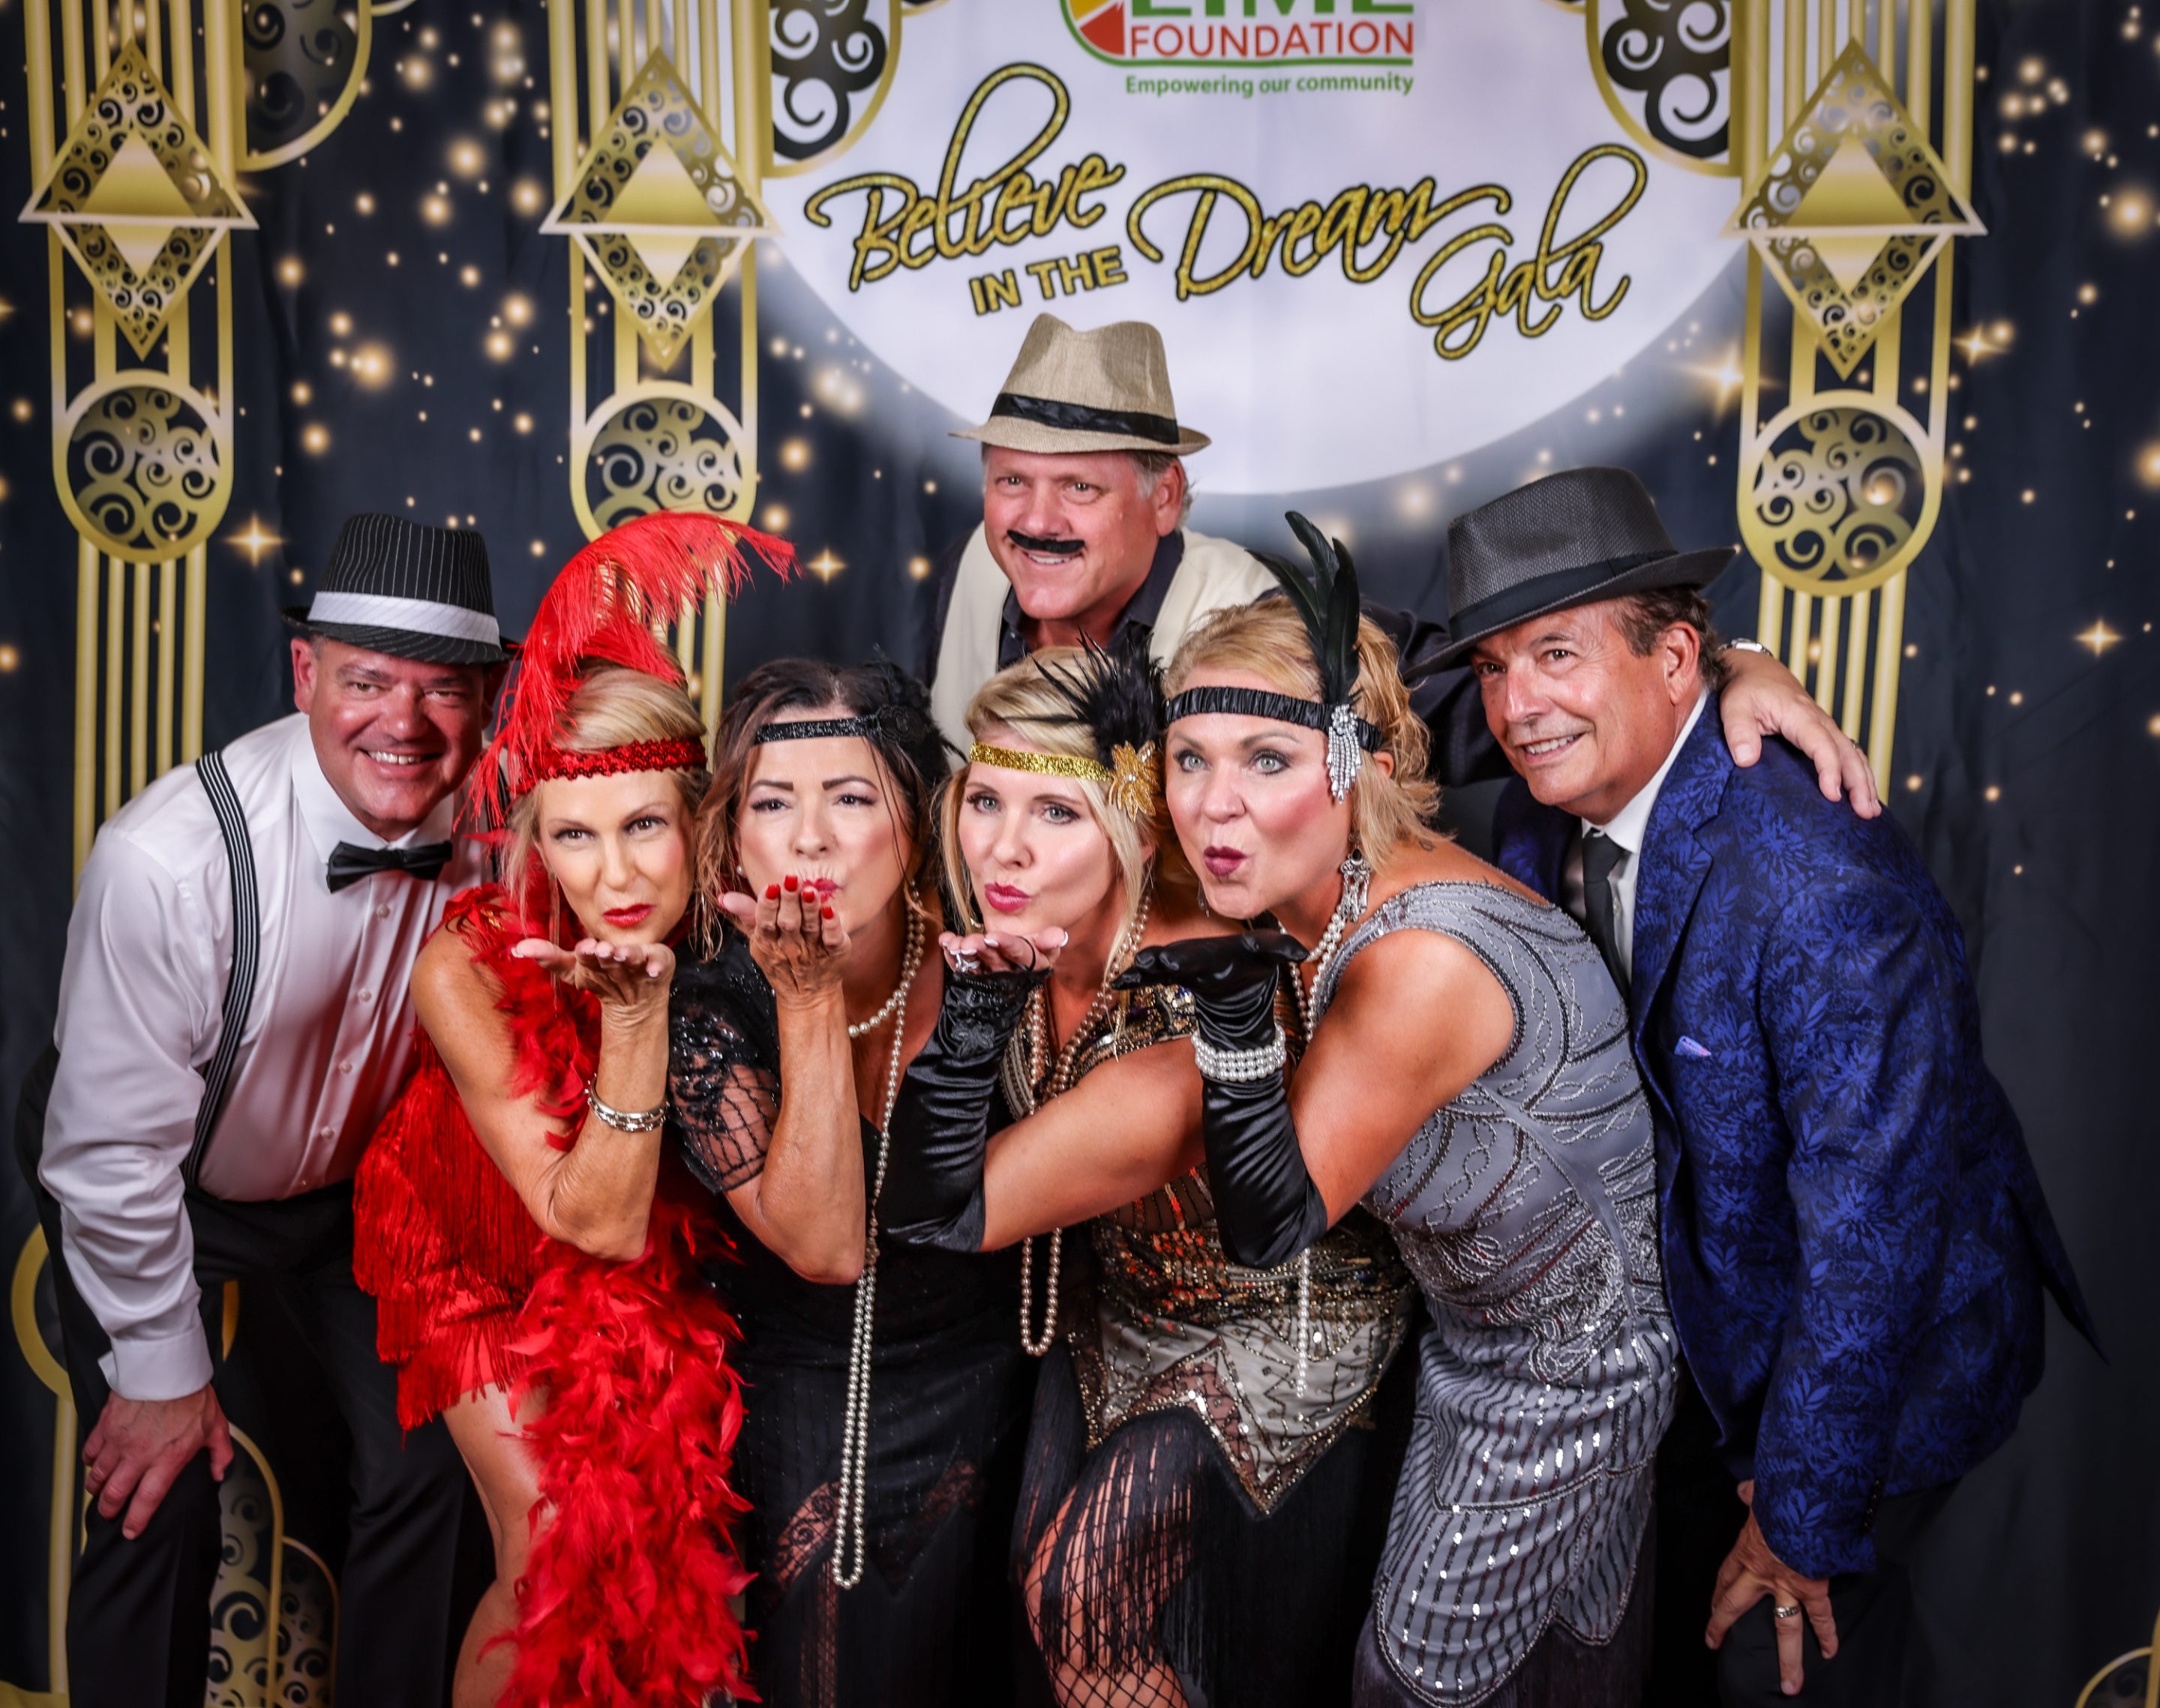 A group of people posing for a photo in a Gatsby-themed photo booth at an event hosted by Sonoma County Non-Profit Organization, The LIME Foundation.